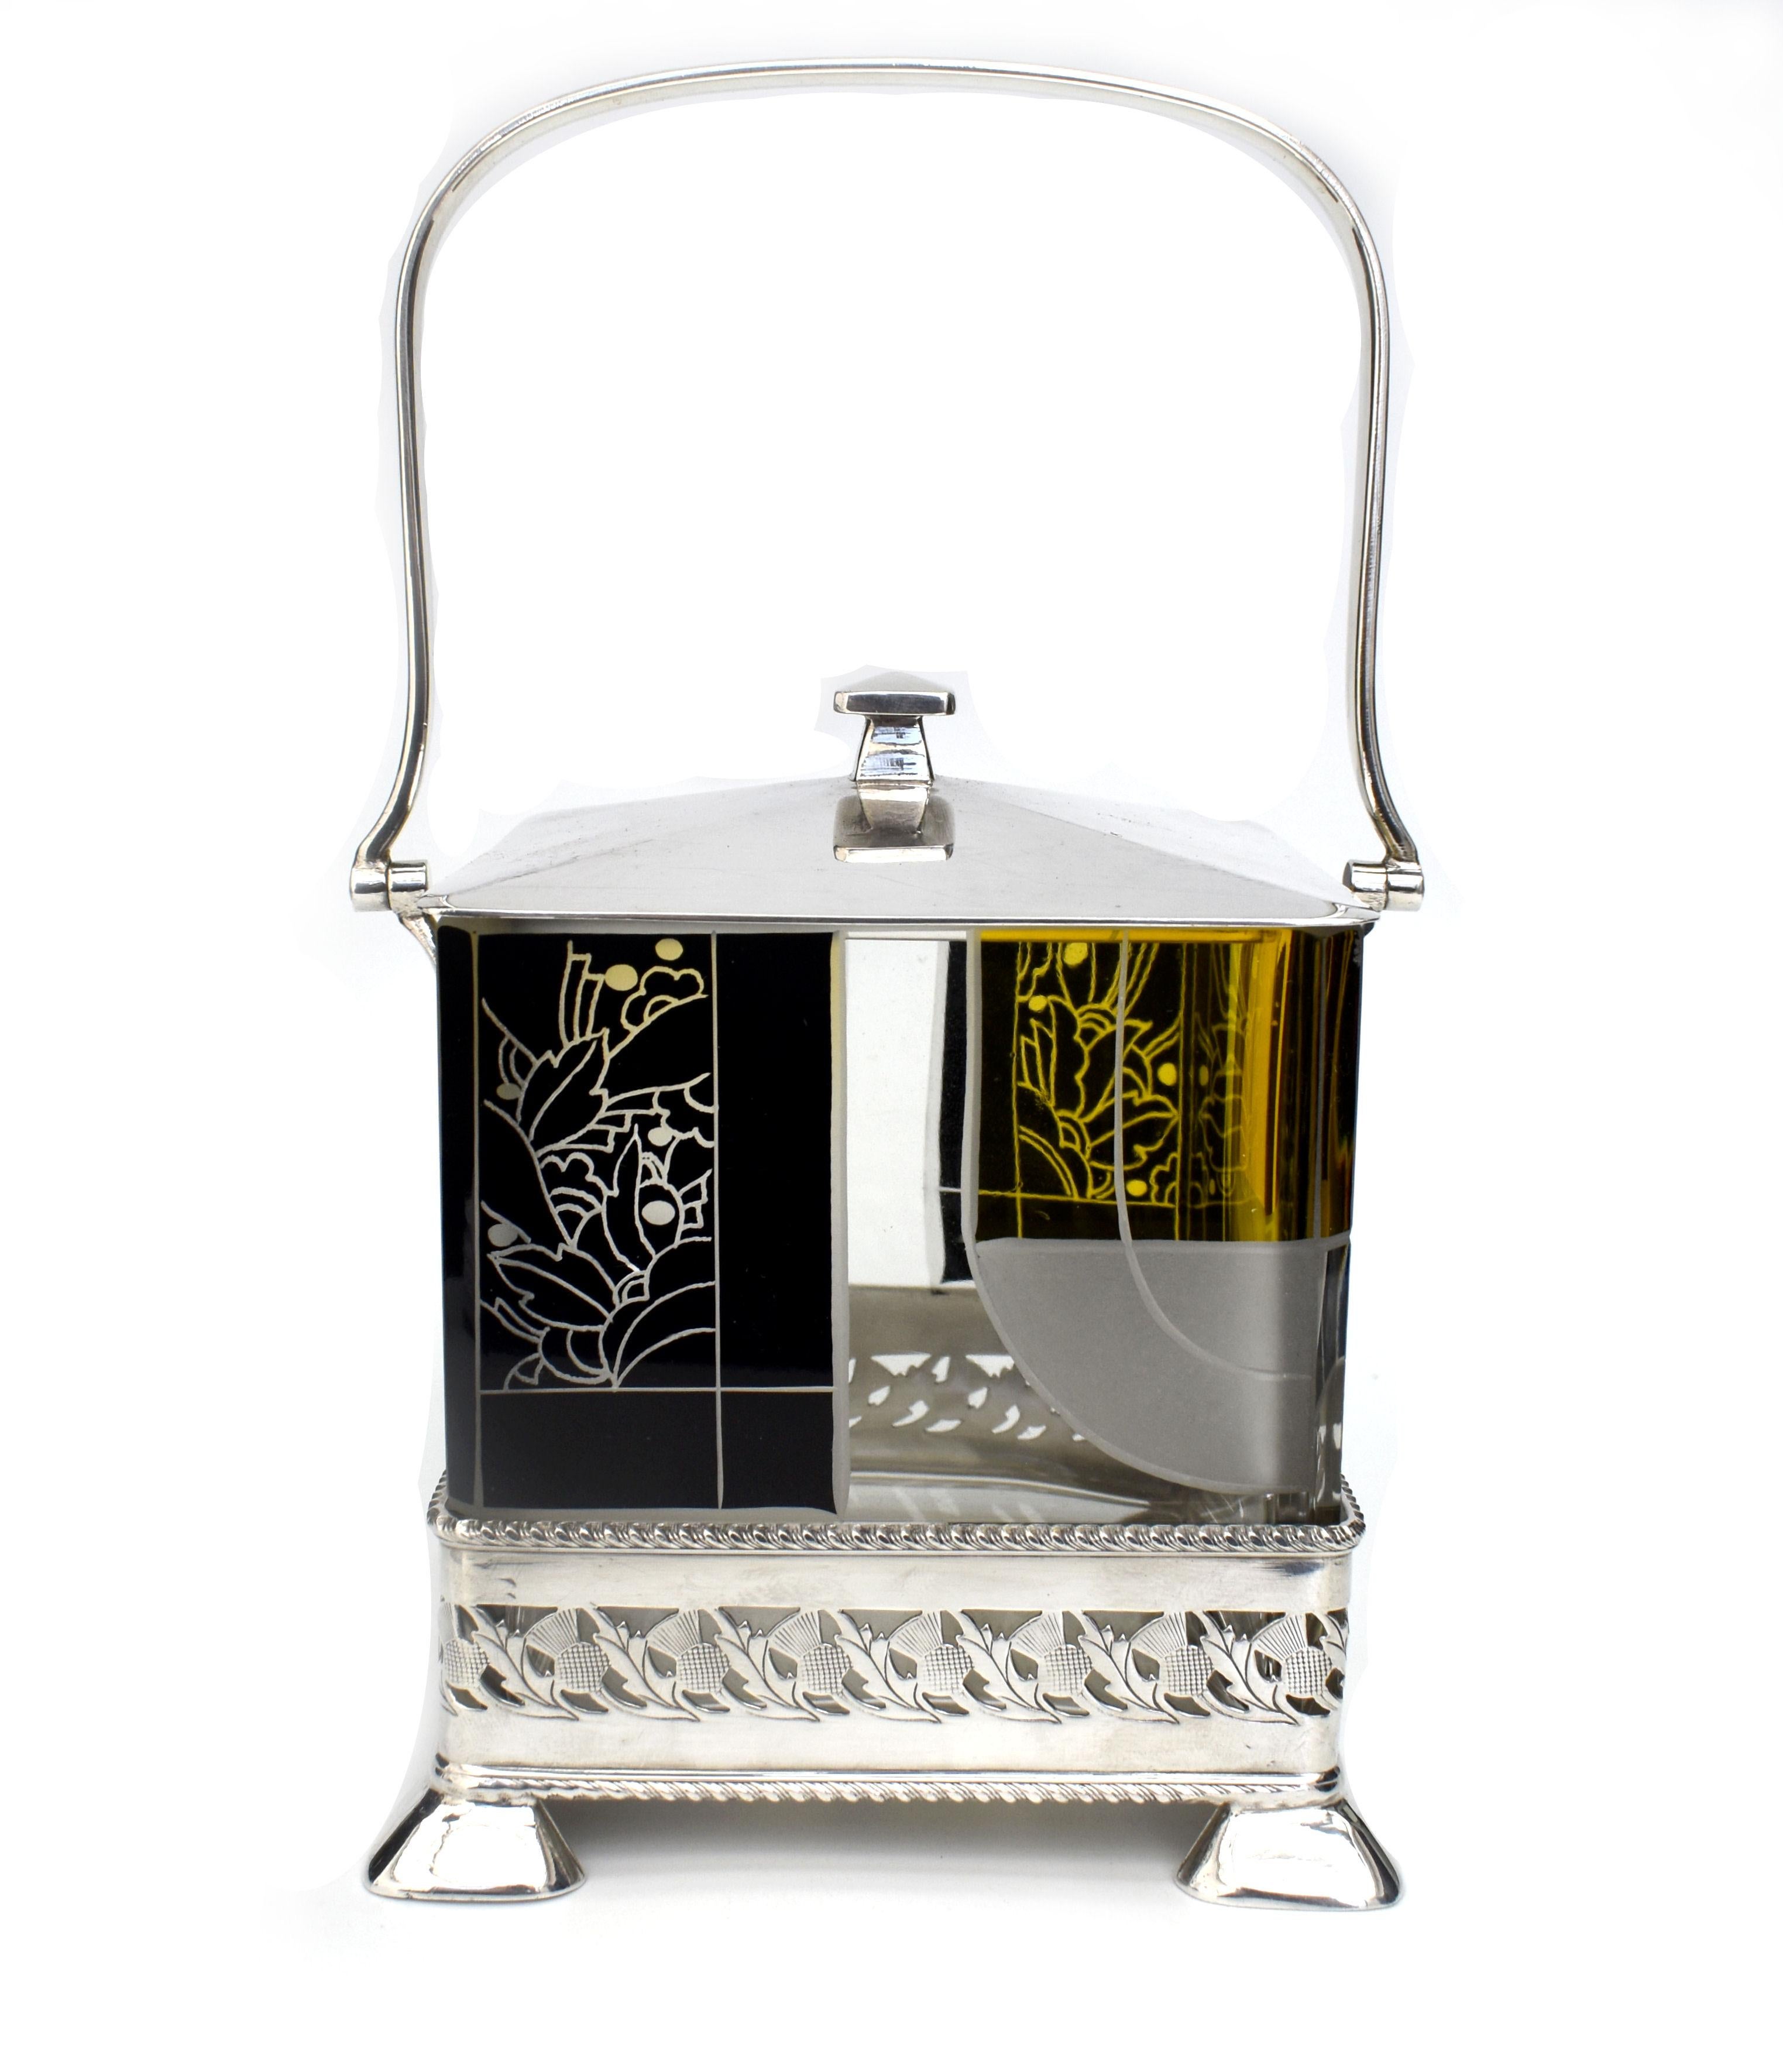 For your consideration is this very sophisticated cut glass preserve jar held in a silver plate stand with matching lid . You can quite imagine this being used at afternoon high tea being held at the Savoy hotel. The stand itself is very attractive,